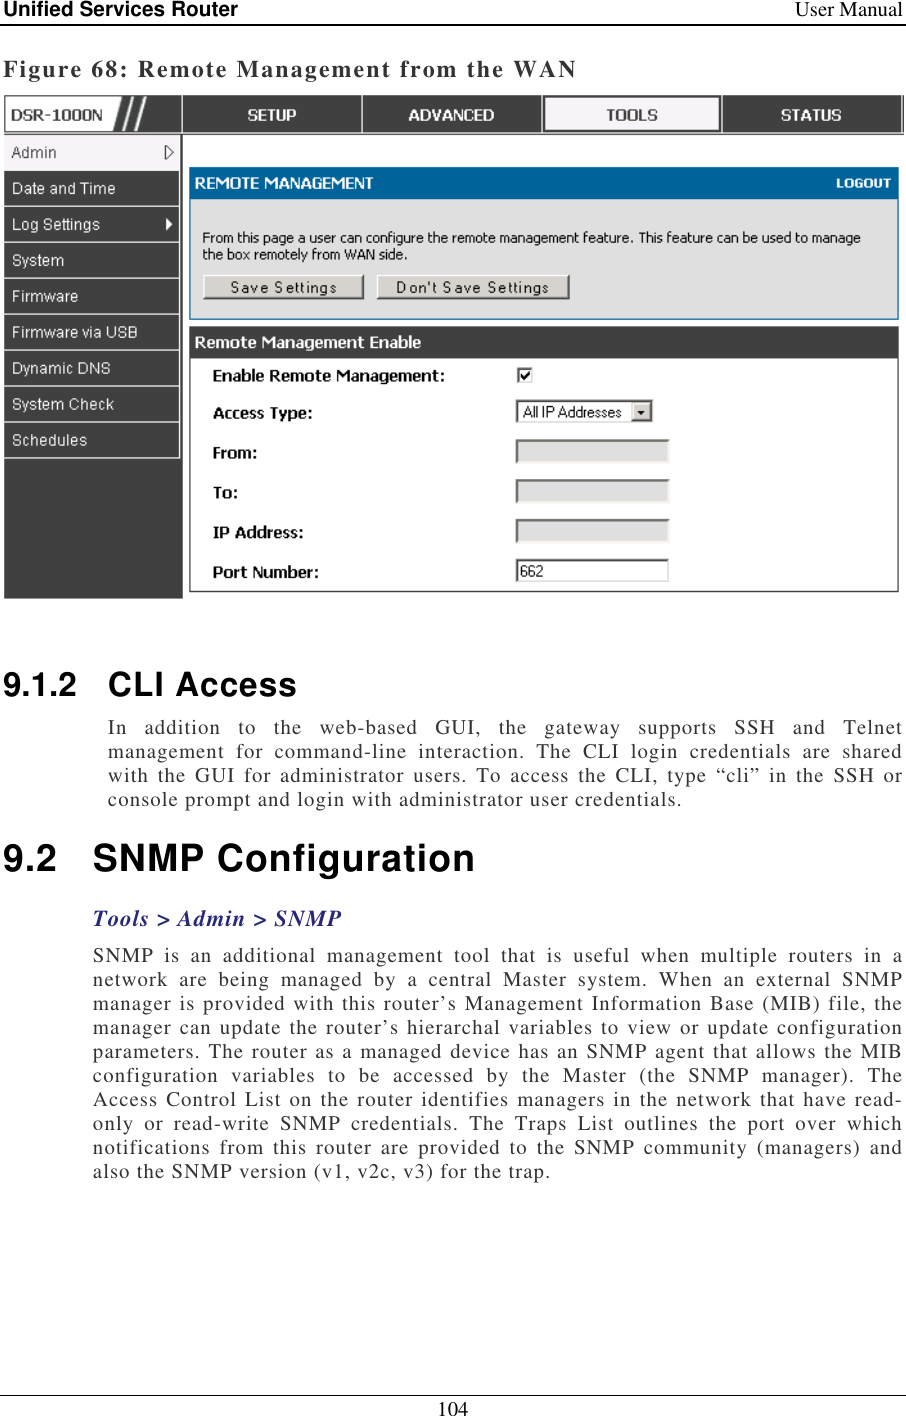 Unified Services Router    User Manual 104  Figure 68: Remote Management from the WAN   9.1.2  CLI Access In  addition  to  the  web-based  GUI,  the  gateway  supports  SSH  and  Telnet management  for  command-line  interaction.  The  CLI  login  credentials  are  shared with  the  GUI  for  administrator  users.  To  access  the  CLI,  type  “cli”  in  the  SSH  or console prompt and login with administrator user credentials.  9.2  SNMP Configuration Tools &gt; Admin &gt; SNMP  SNMP  is  an  additional  management  tool  that  is  useful  when  multiple  routers  in  a network  are  being  managed  by  a  central  Master  system.  When  an  external  SNMP manager is provided with this router’s Management Information Base (MIB) file, the manager can  update the router’s  hierarchal variables to view or update configuration parameters. The router as a managed device has an SNMP agent that allows the MIB configuration  variables  to  be  accessed  by  the  Master  (the  SNMP  manager).  The Access Control List on the  router identifies managers in  the network that have read-only  or  read-write  SNMP  credentials.  The  Traps  List  outlines  the  port  over  which notifications  from  this  router  are  provided  to  the  SNMP  community  (managers)  and also the SNMP version (v1, v2c, v3) for the trap.  